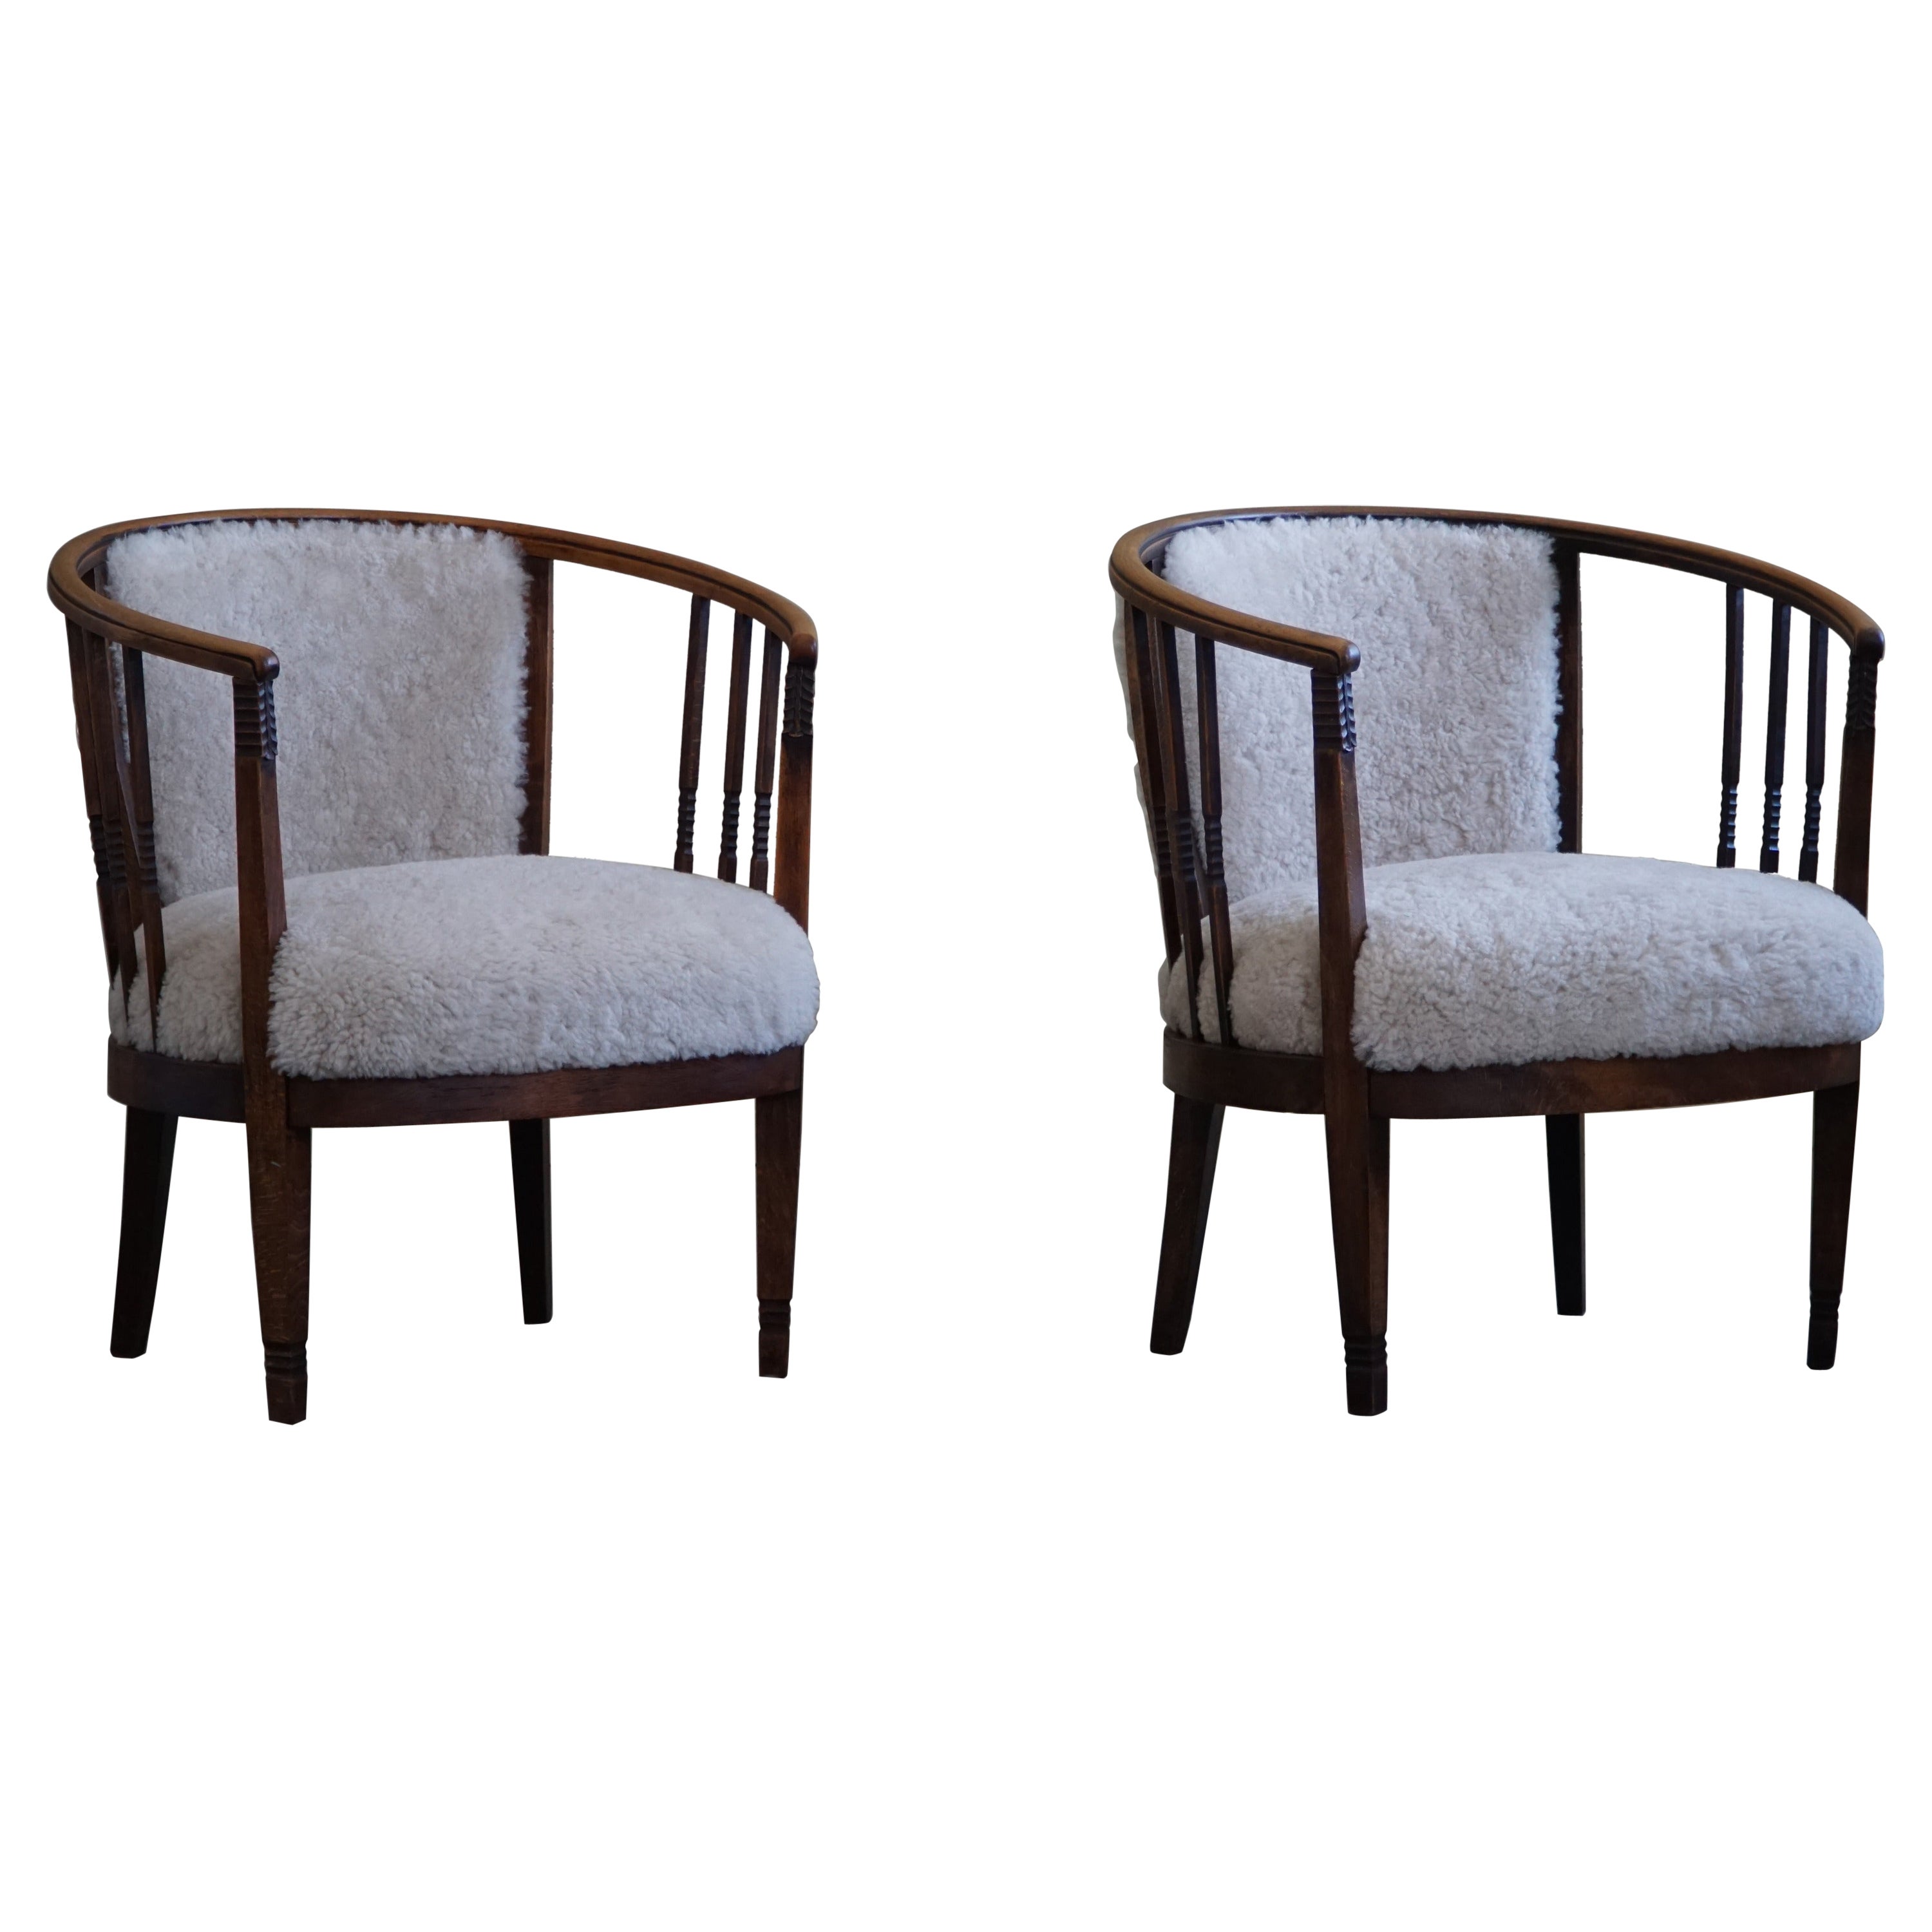 Pair of Danish Armchairs in Beech, Reupholstered Lambswool, Jugendstil, 1900s For Sale